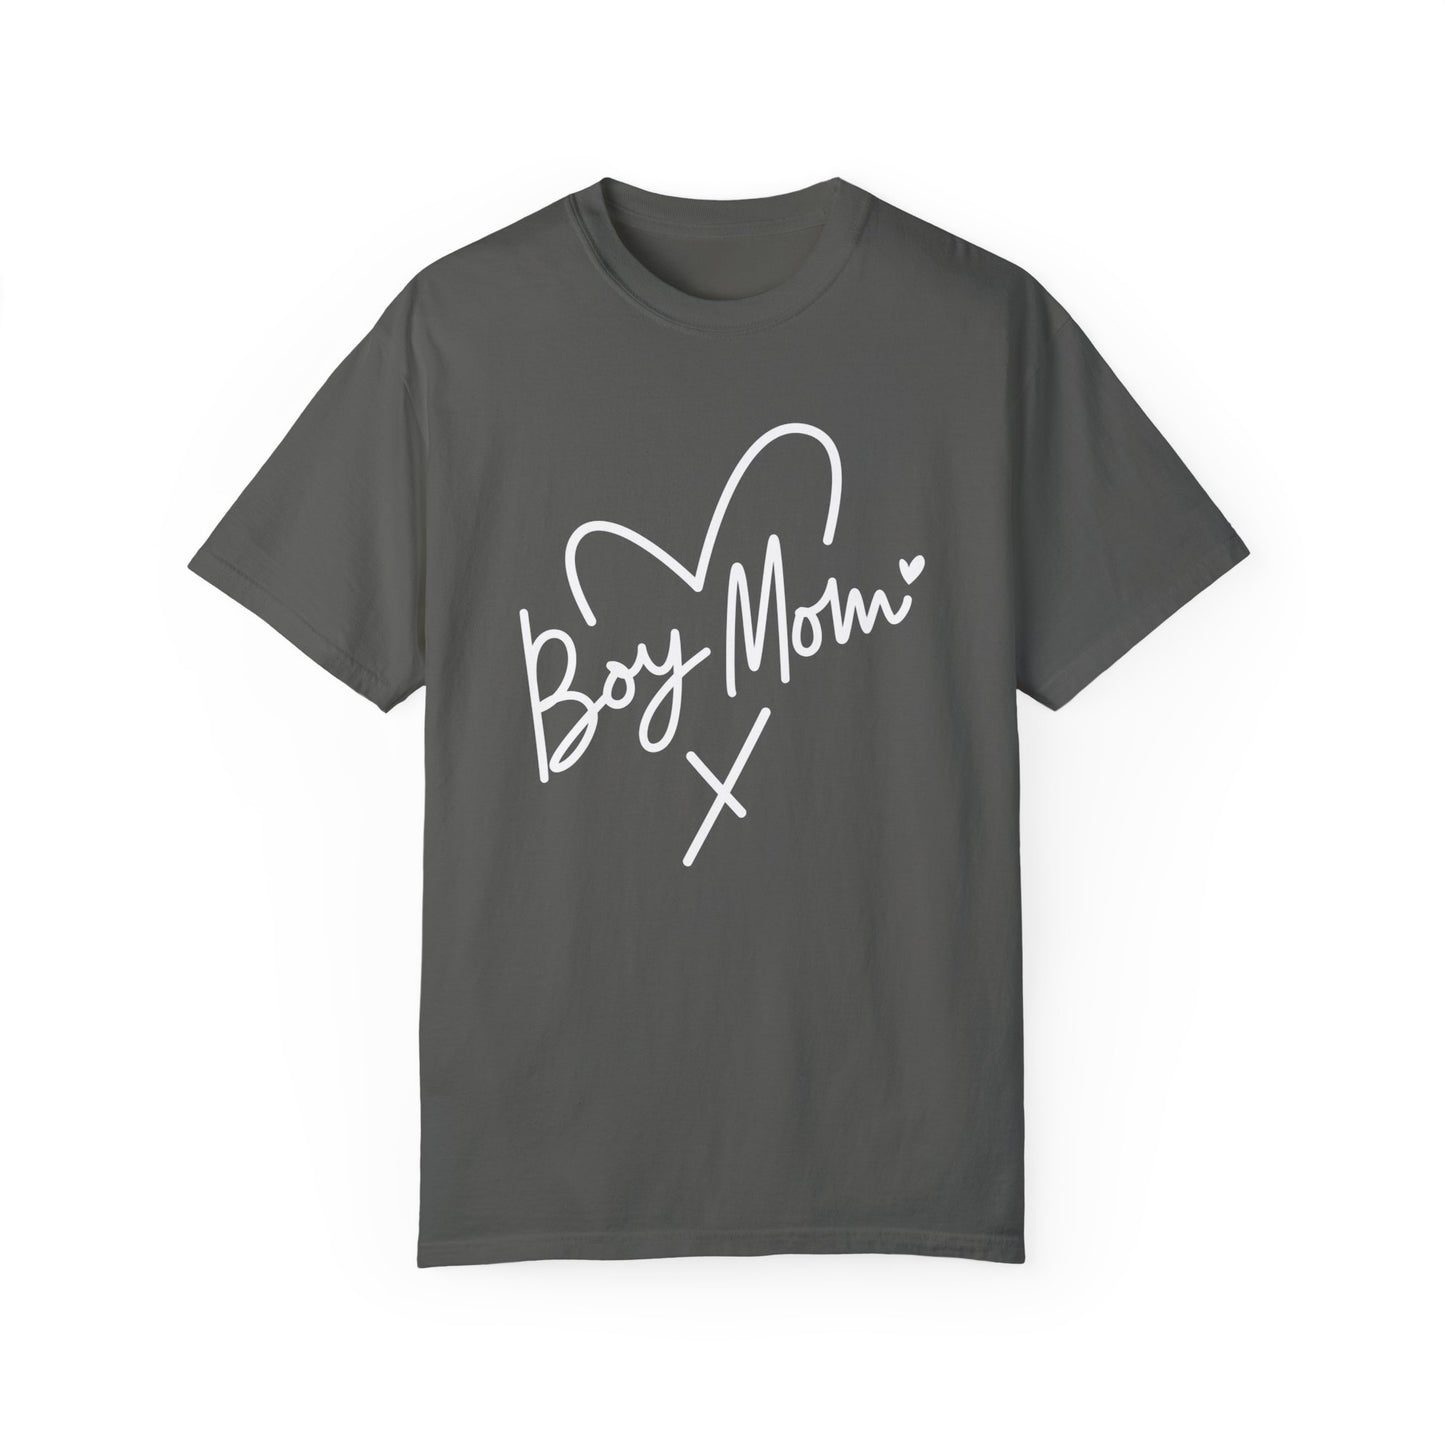 Heart-shaped boy mom shirt in Comfort Colors